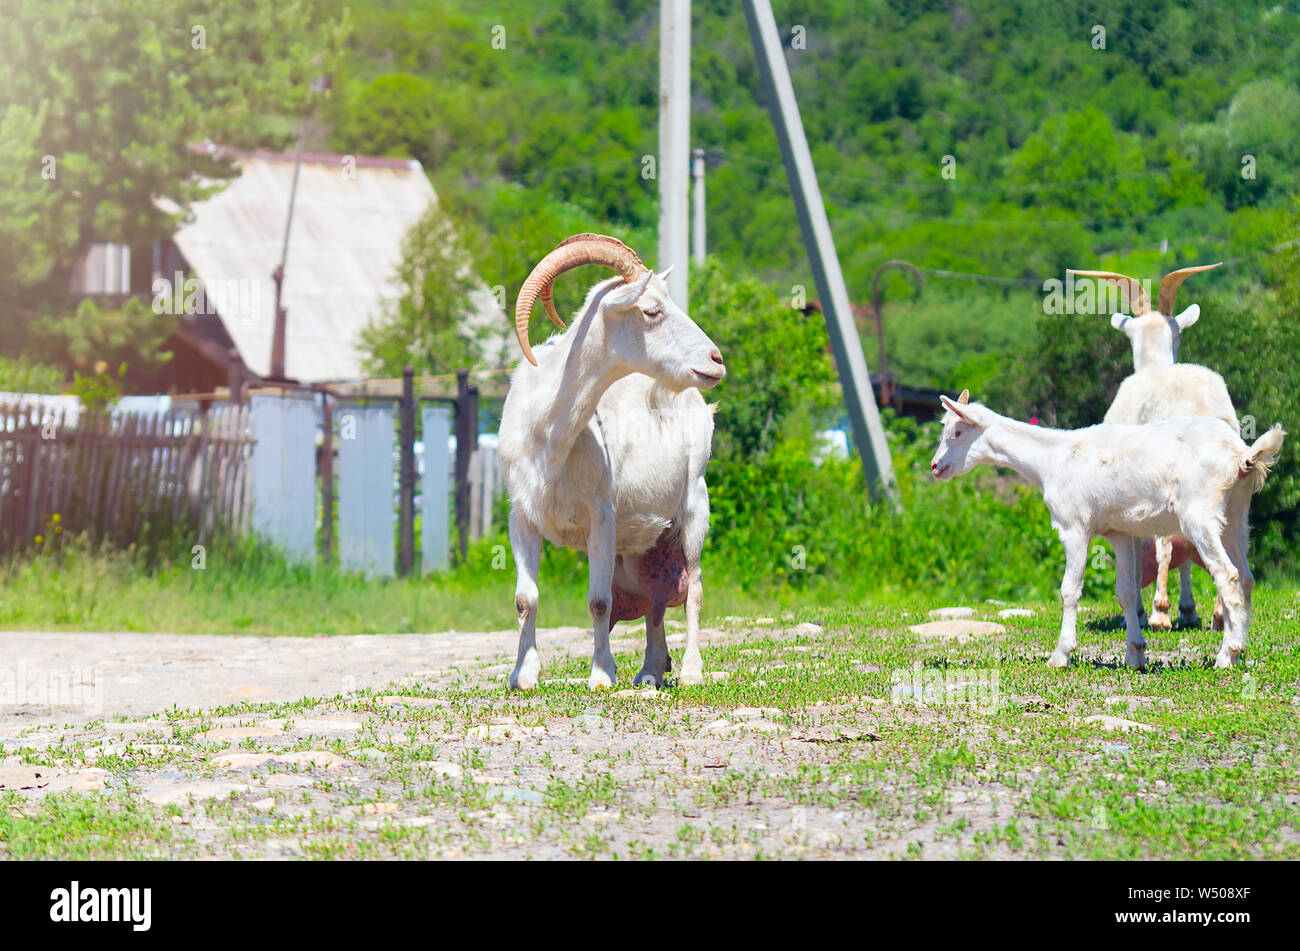 Two Domestic White Nanny Goats or Does (Capra Aegagrus Hircus) and a Goat Kid on a Rural Road in the Village on a Sunny Summer Day. Stock Photo